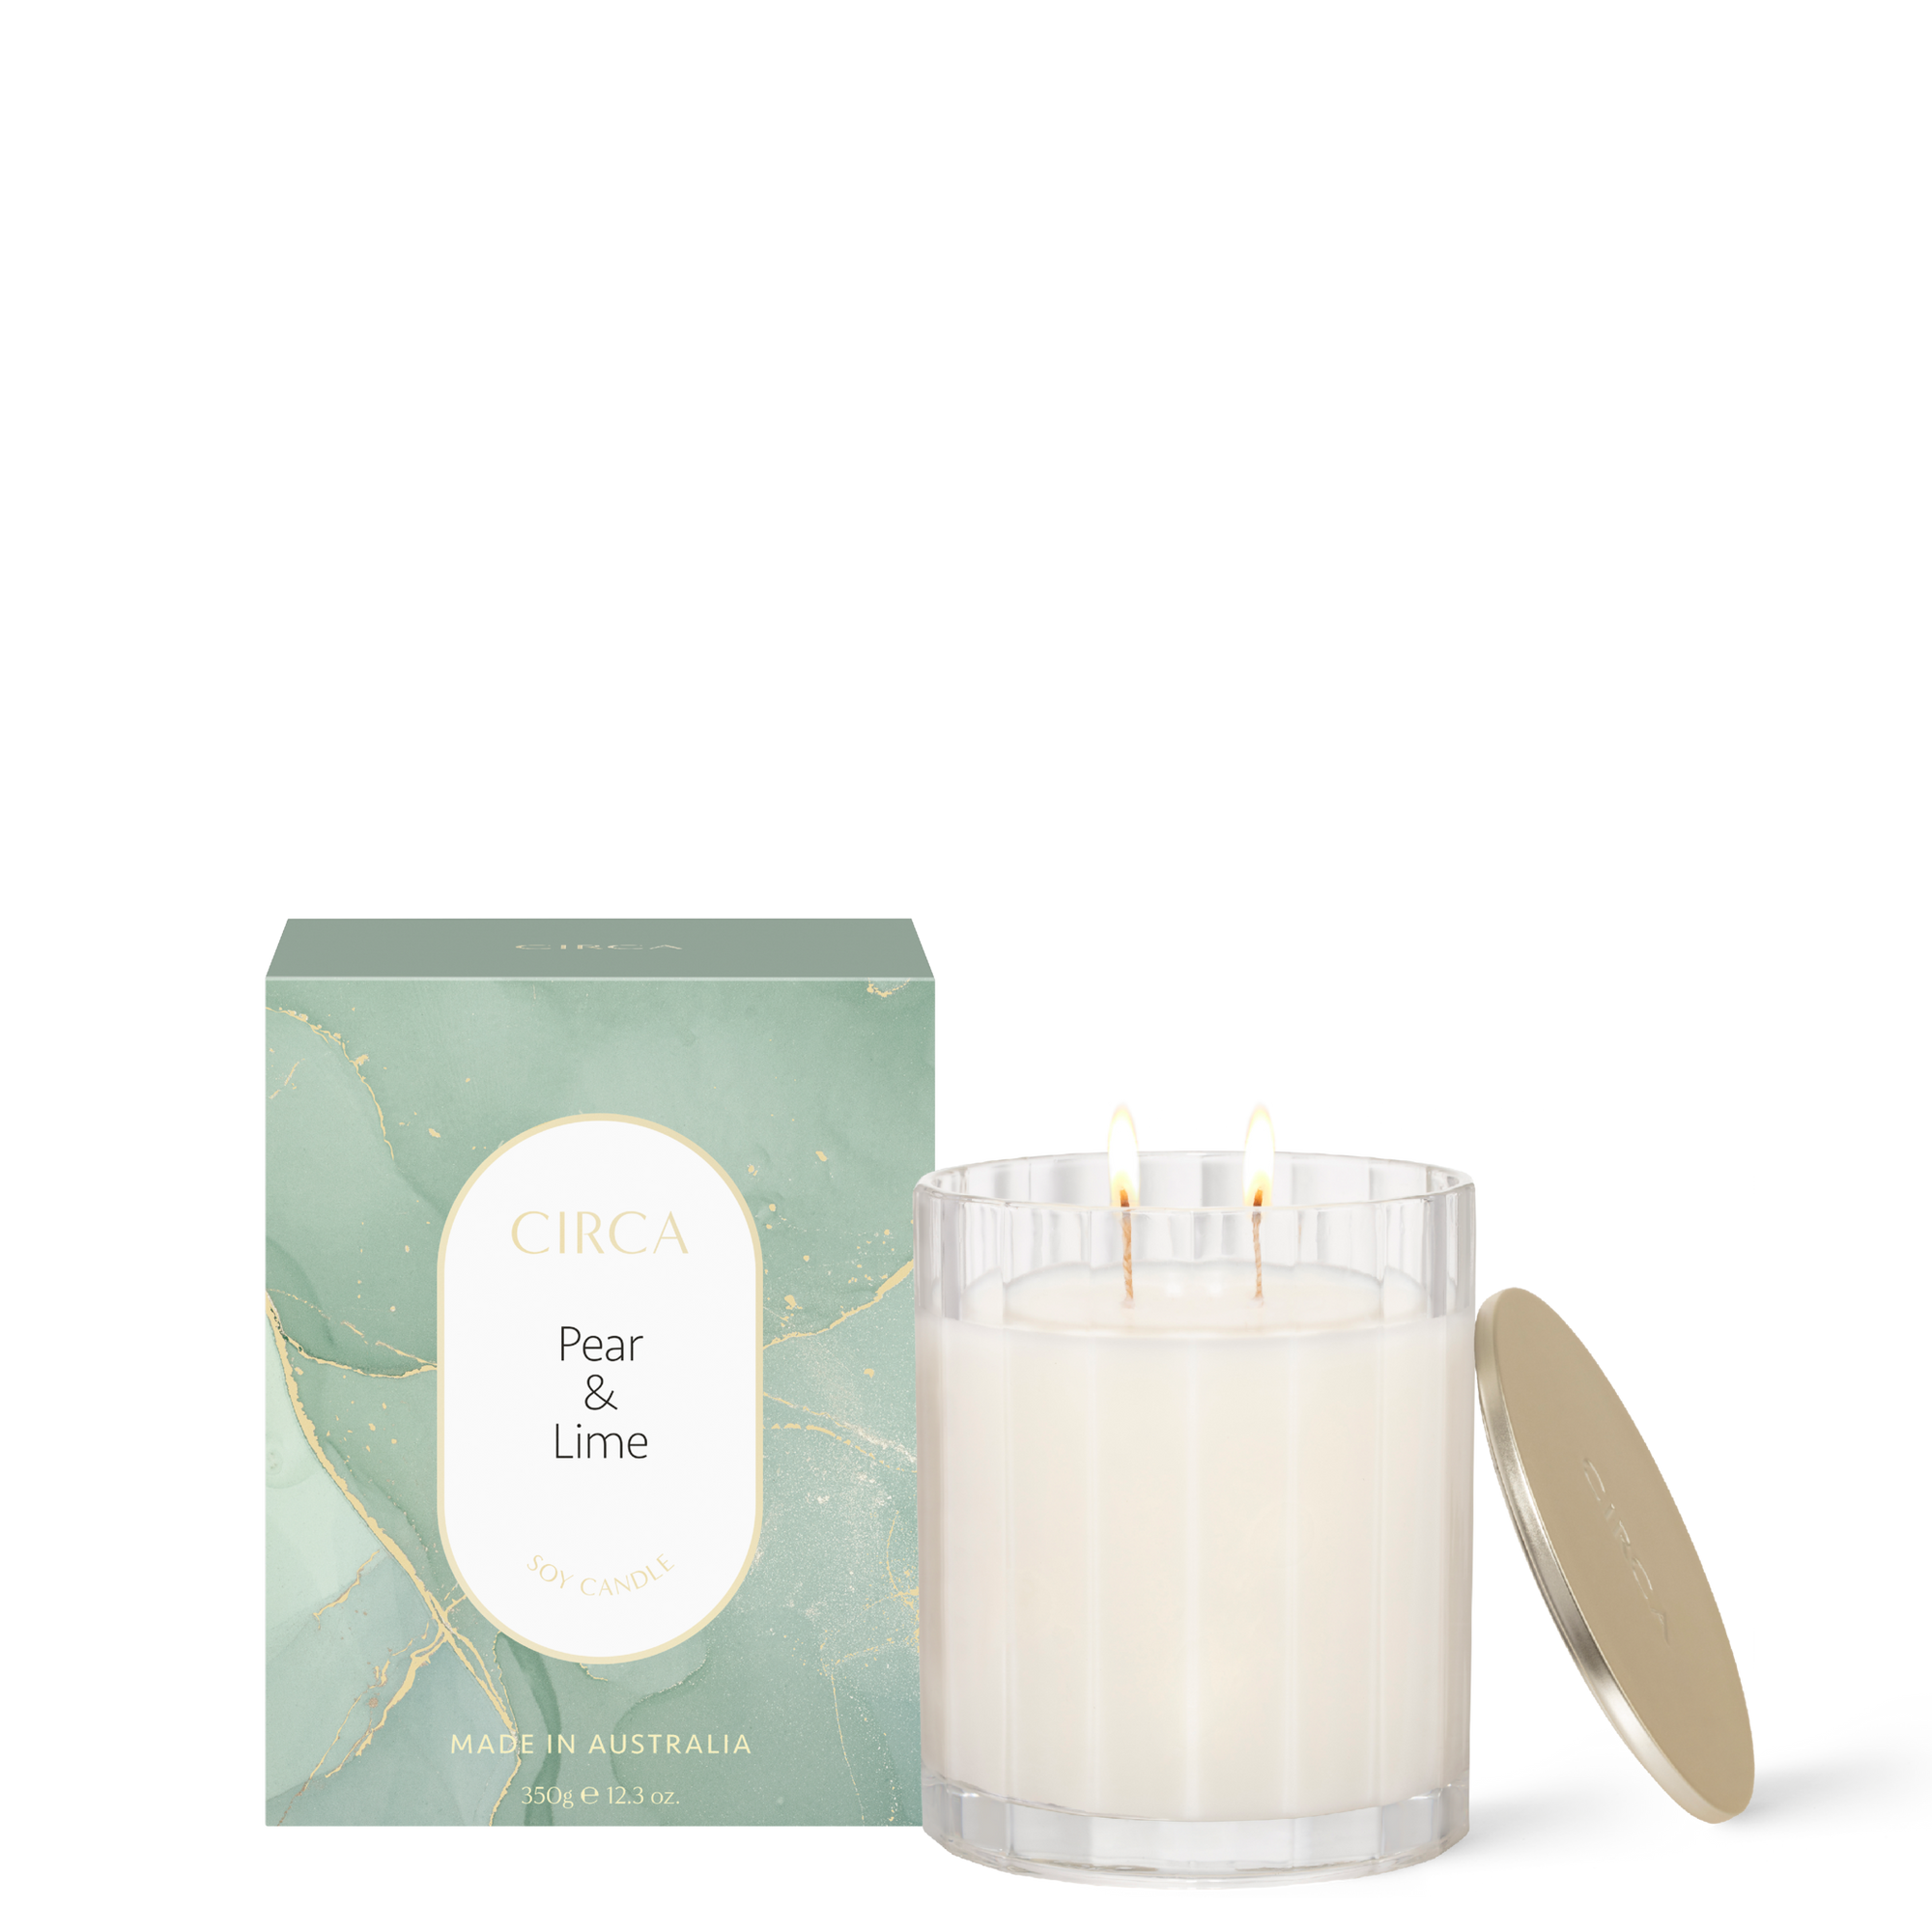 CIRCA 350g Candle - PEAR & LIME